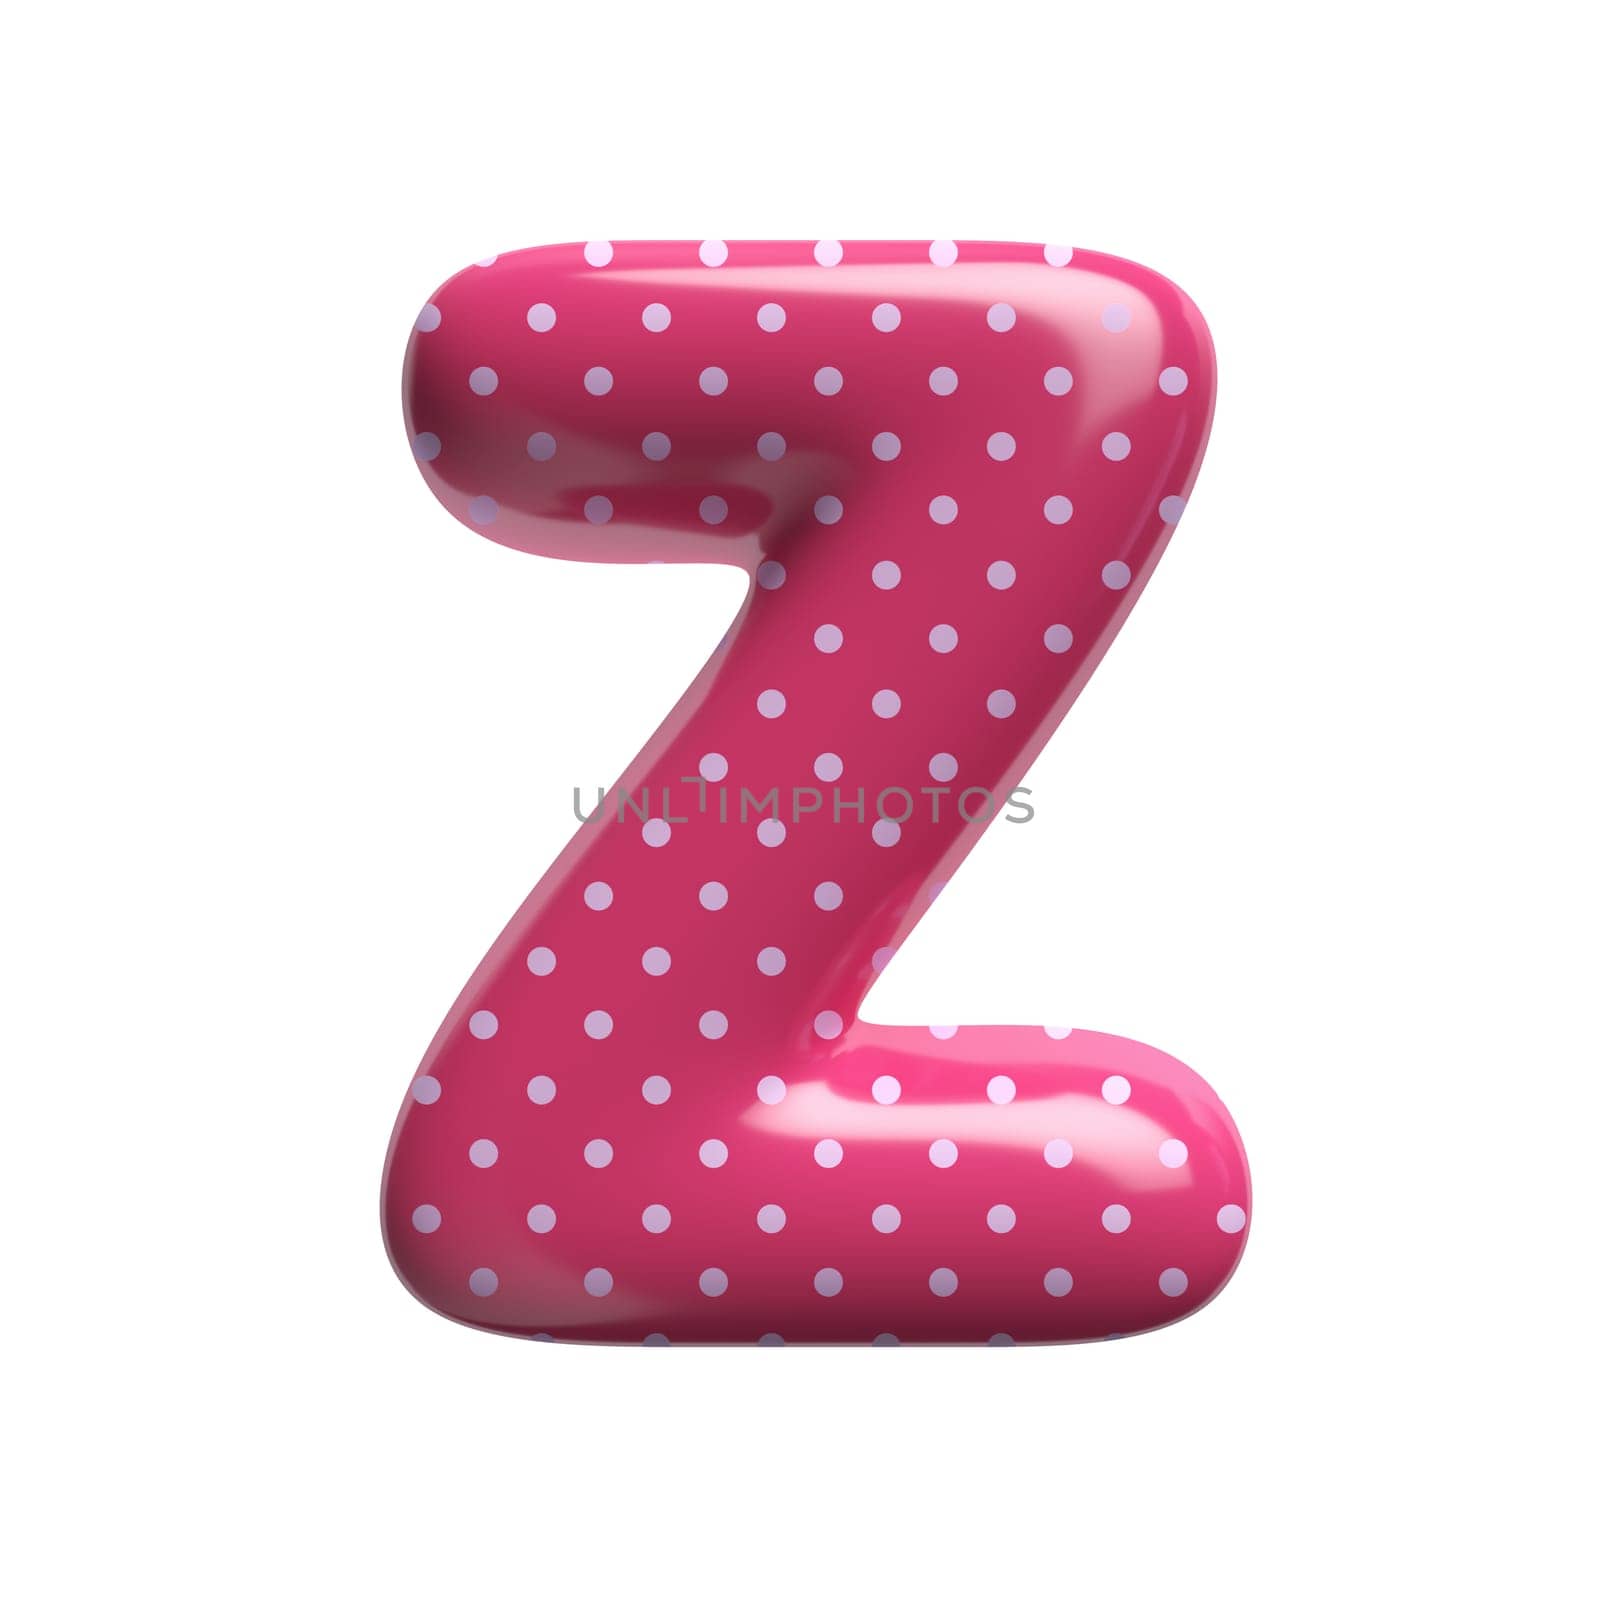 Polka dot letter Z - Upper-case 3d pink retro font - suitable for Fashion, retro design or decoration related subjects by chrisroll